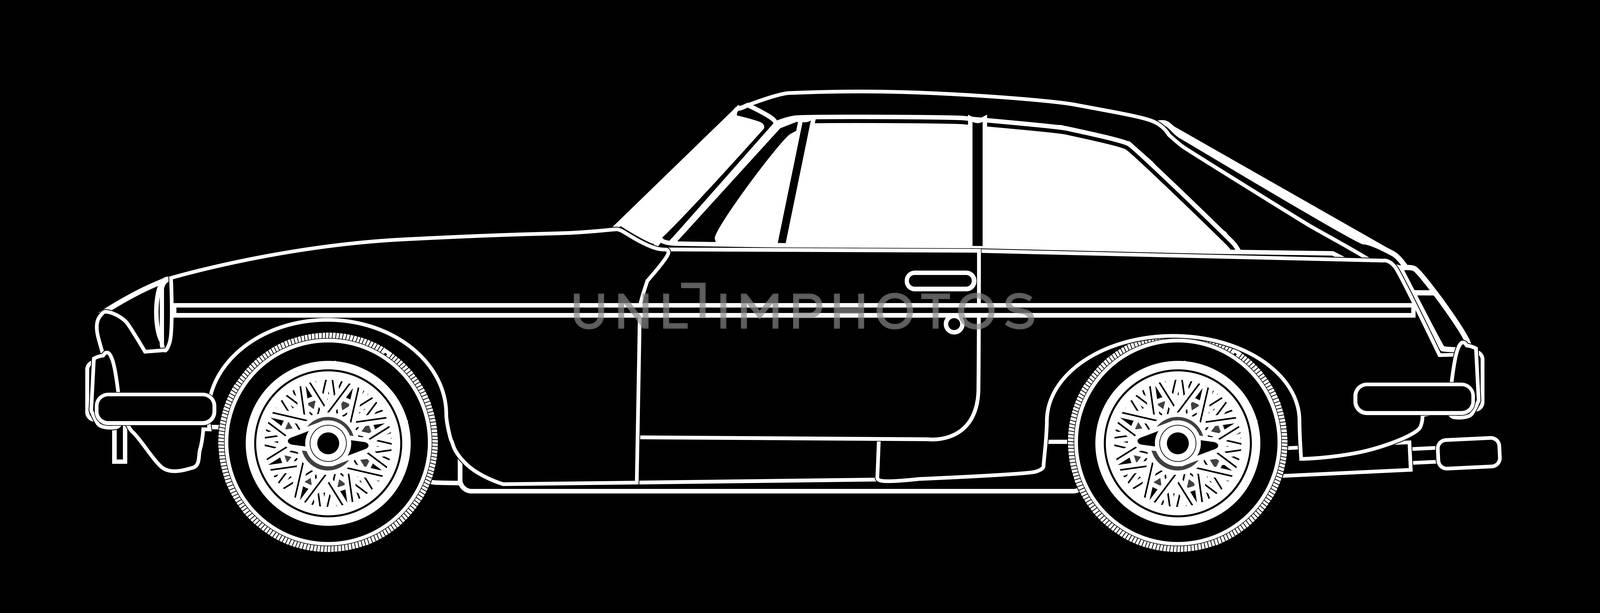 UK Sports Car Coupe Outline by Bigalbaloo